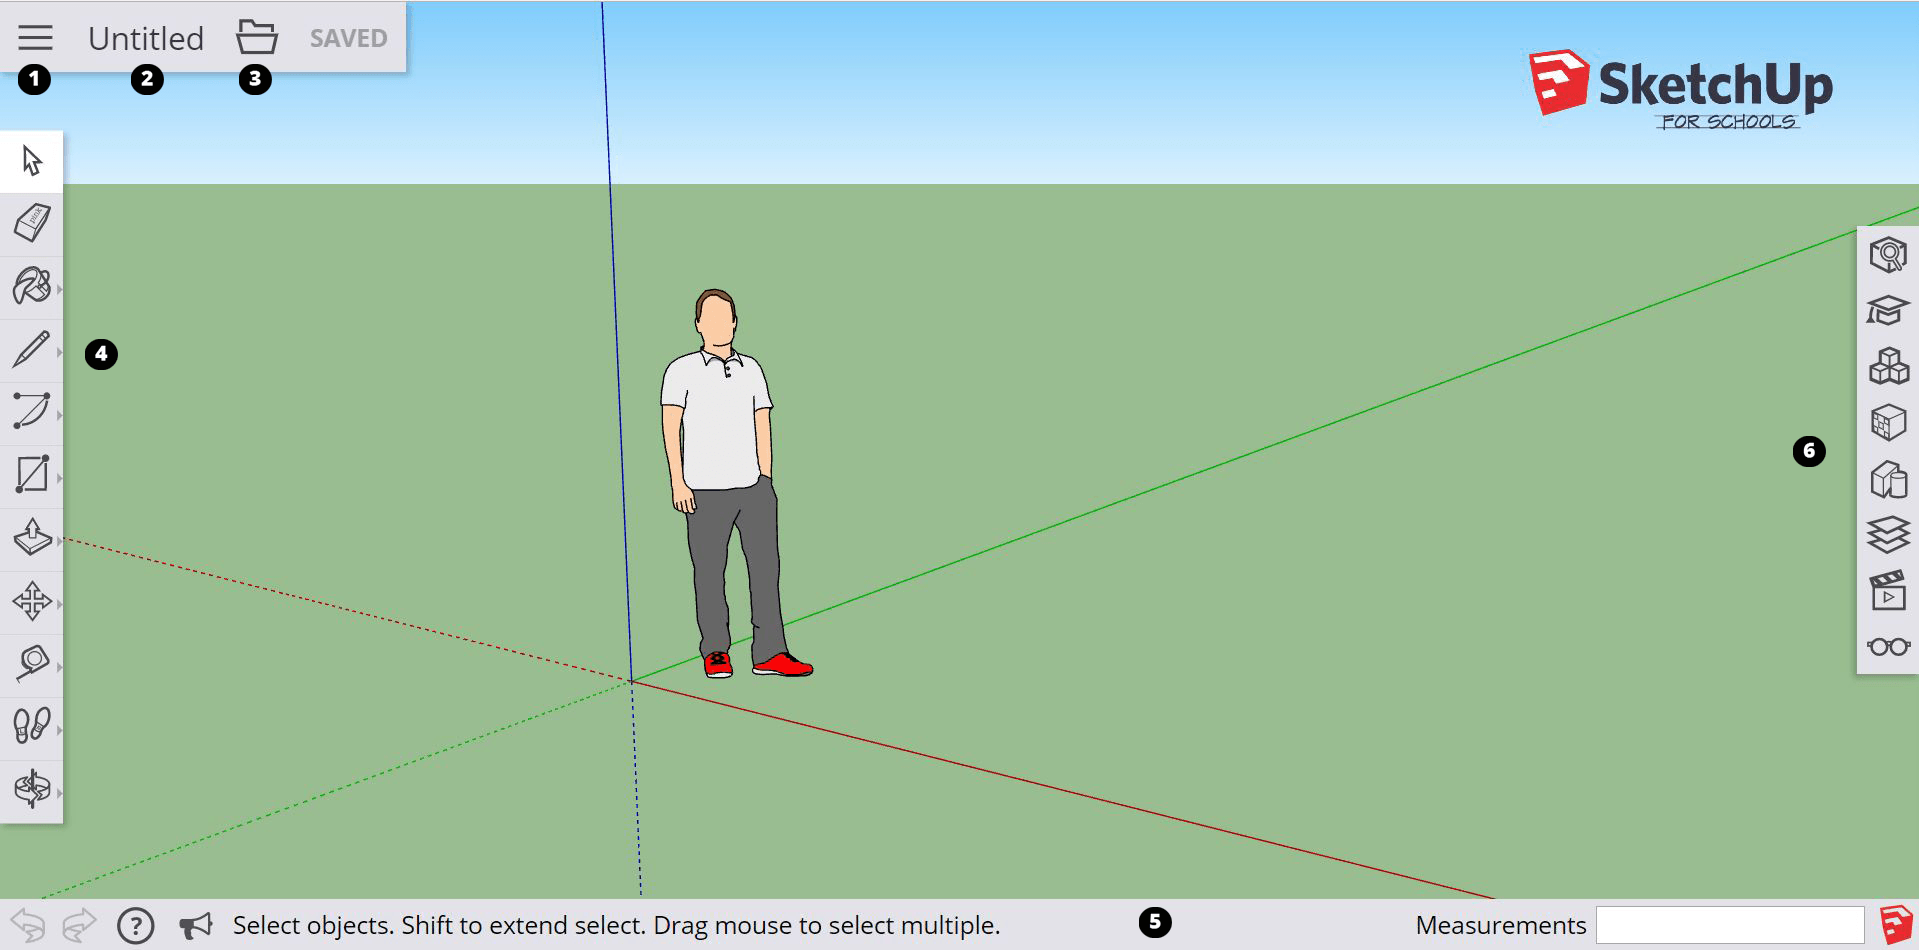 The modeling interface in SketchUp for Schools